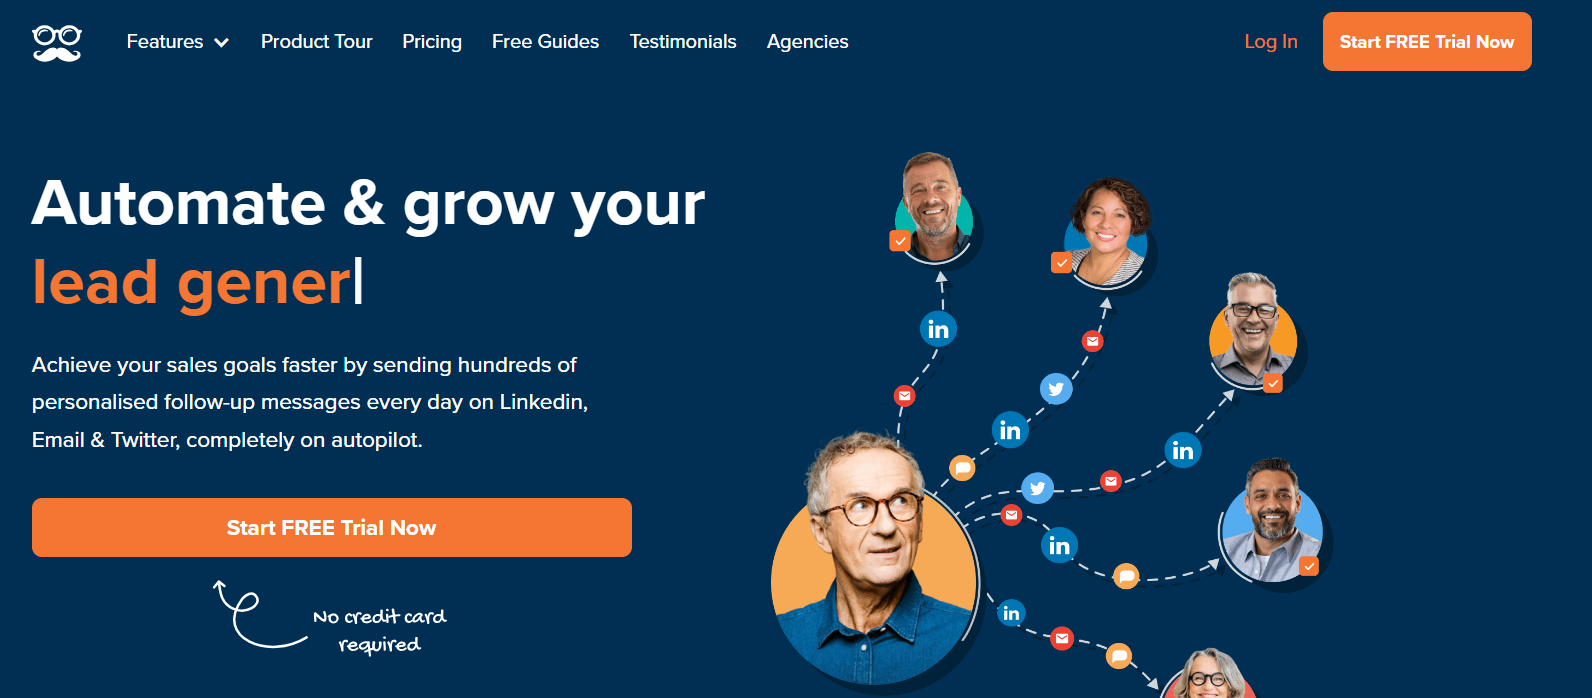 Meet Alfred - LinkedIn automation tool for lead generation